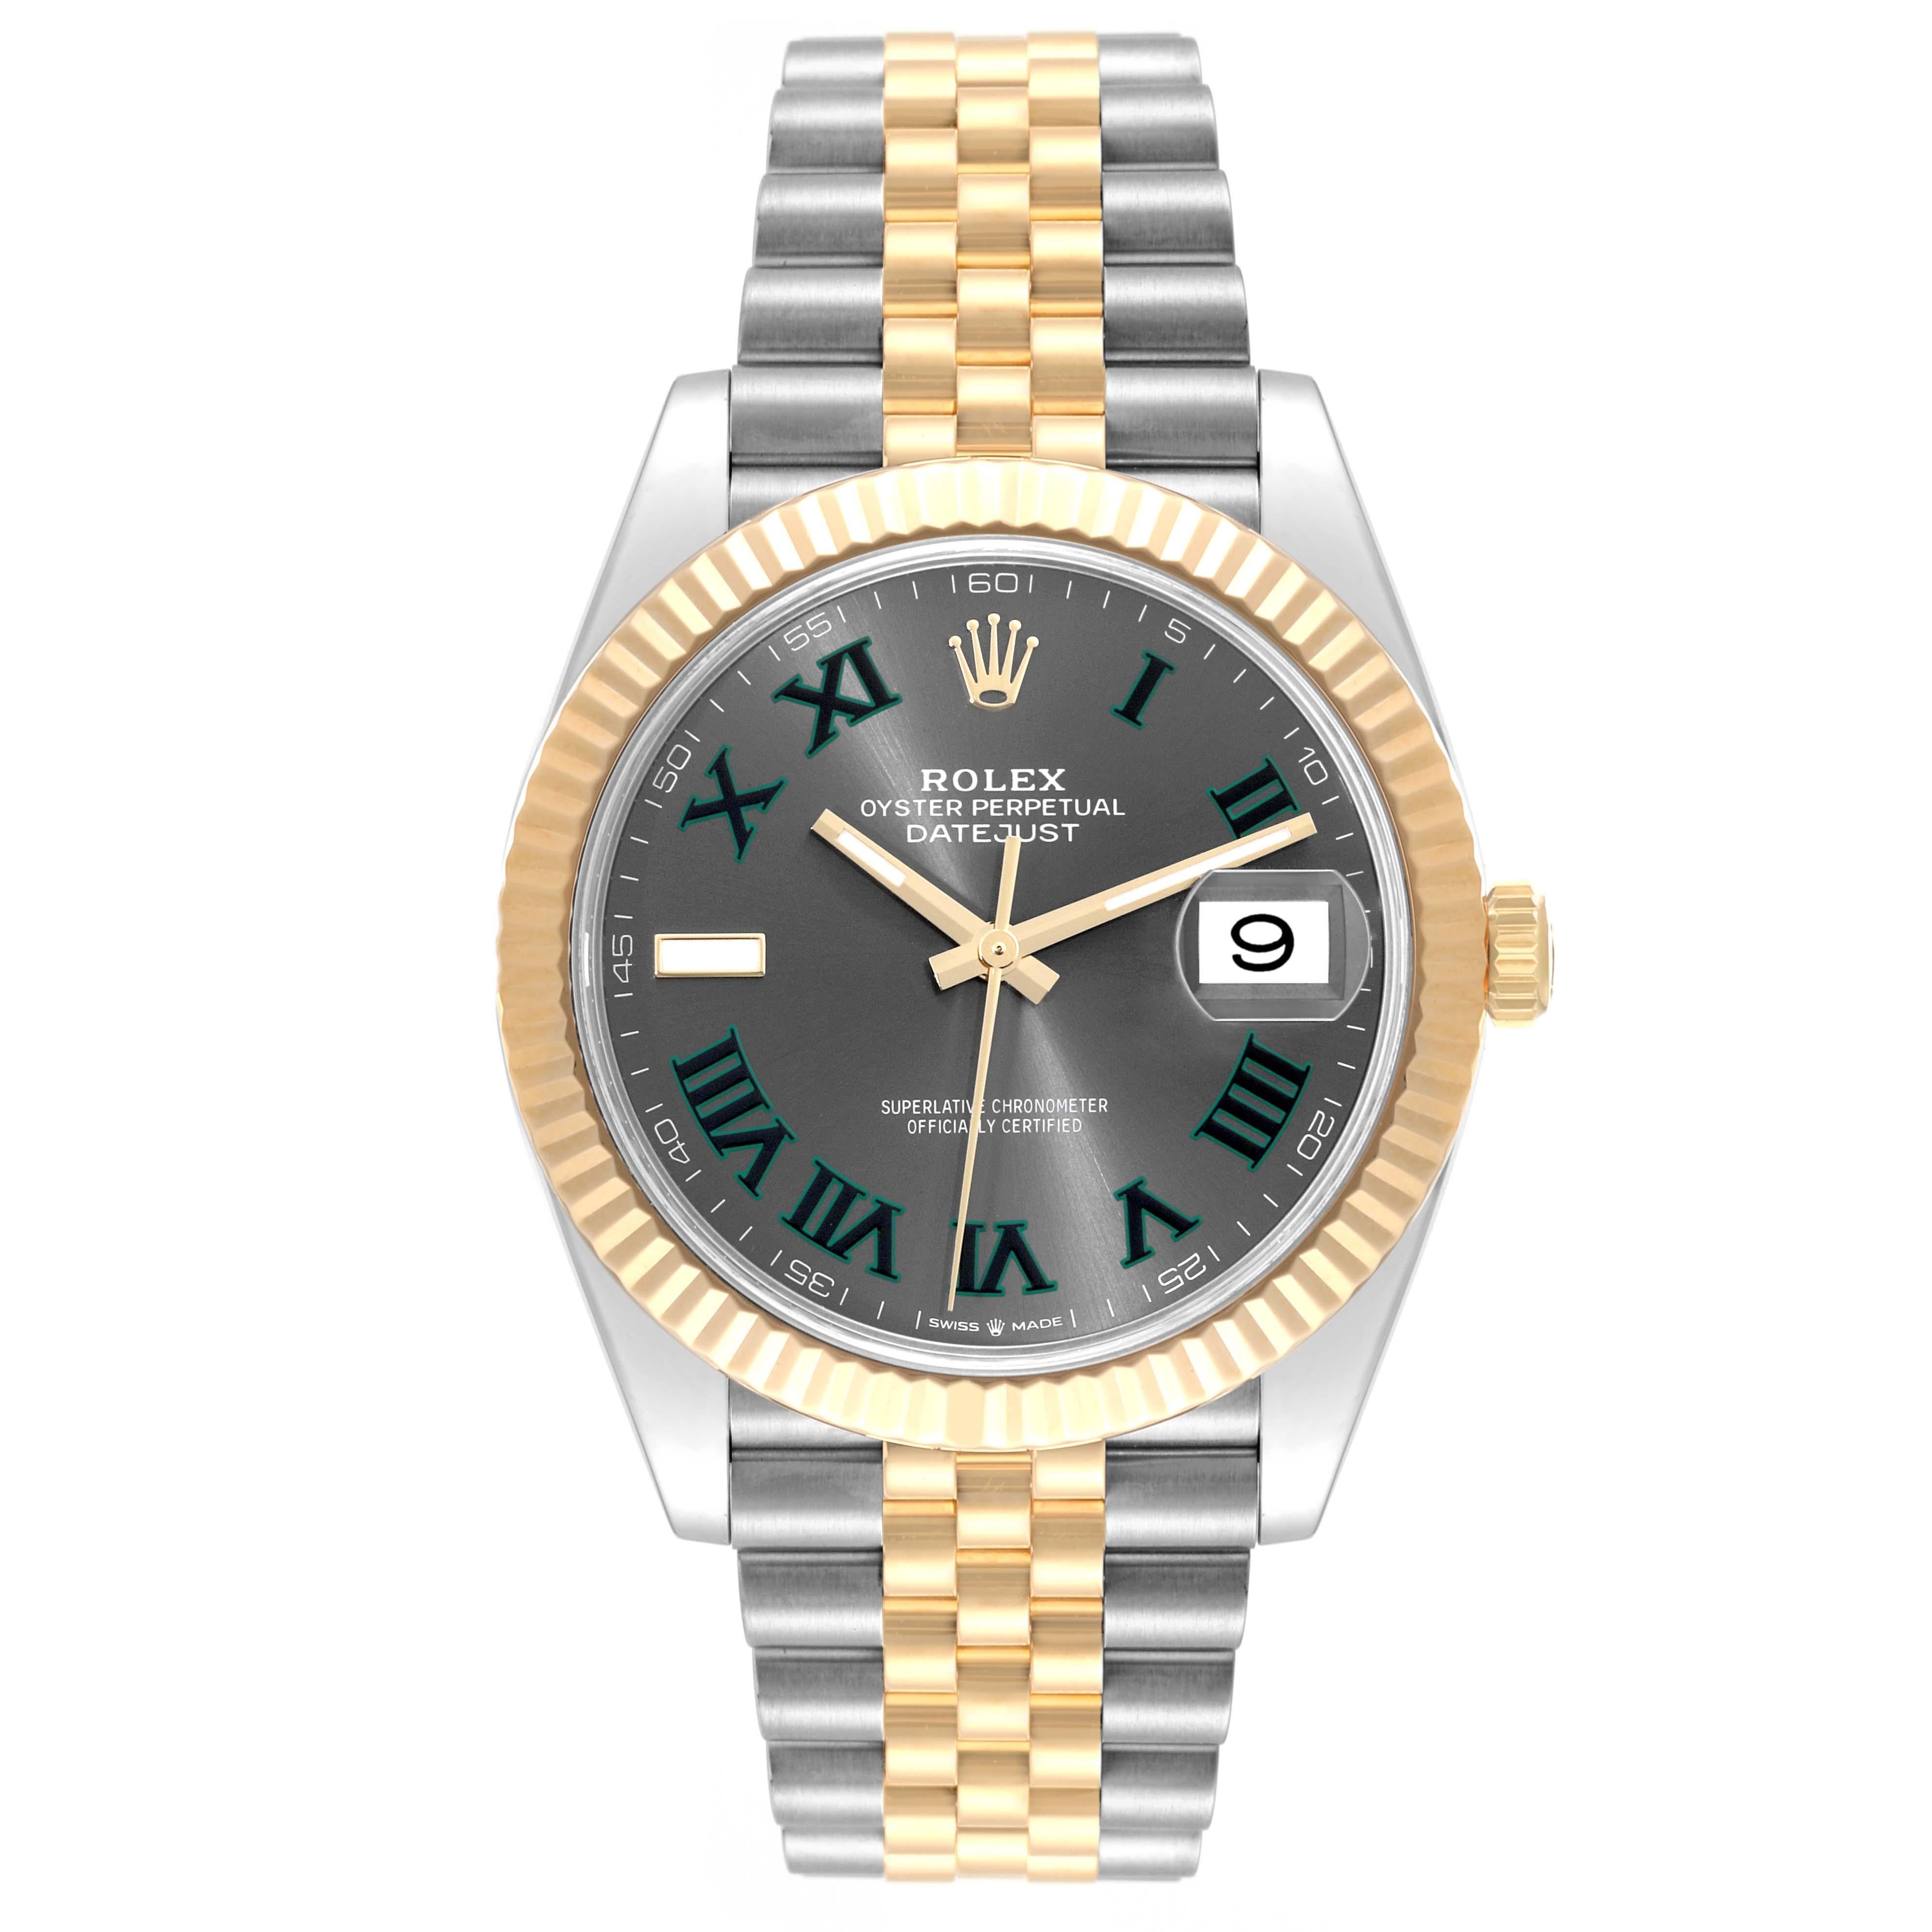 Rolex Datejust 41 Steel Yellow Gold Wimbledon Dial Mens Watch 126333 Box Card. Officially certified chronometer automatic self-winding movement with quickset date. Stainless steel and 18K yellow gold case 41.0 mm in diameter. Rolex logo on crown.